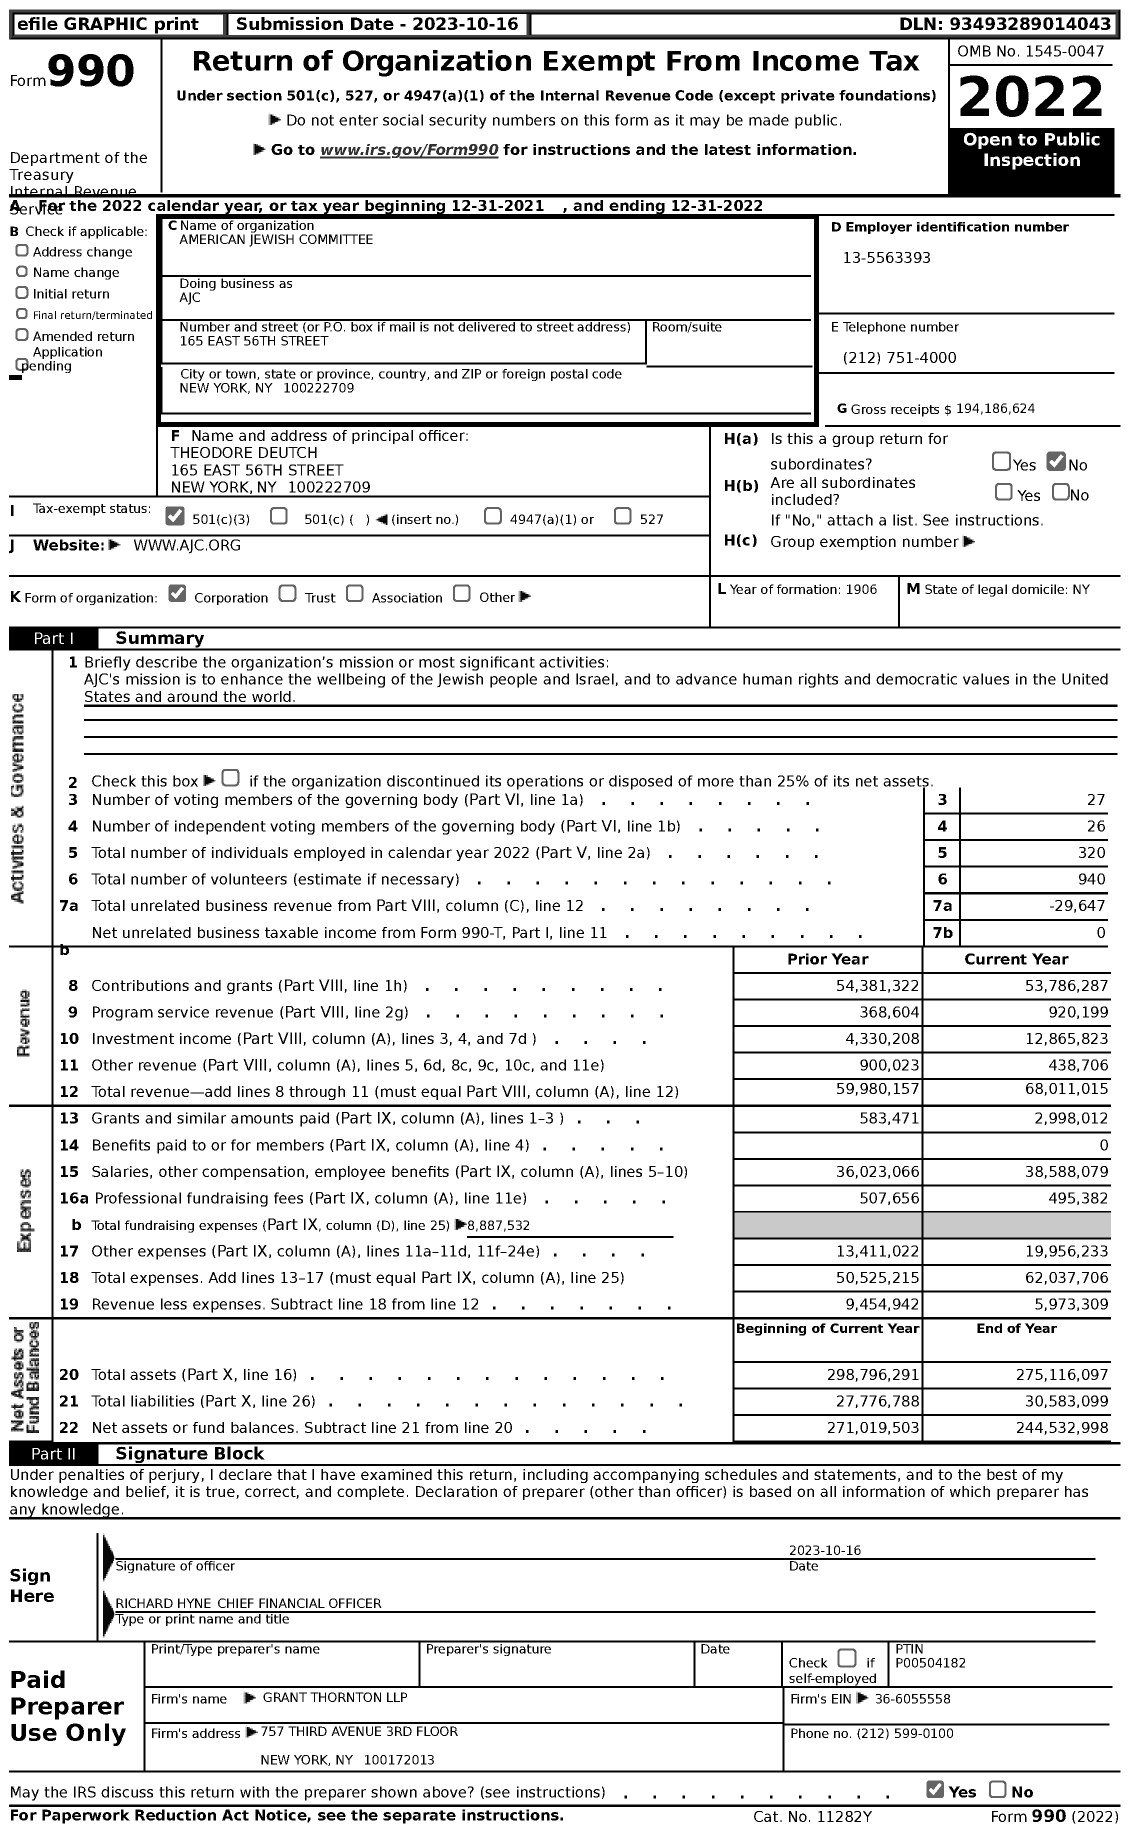 Image of first page of 2022 Form 990 for American Jewish Committee (AJC)